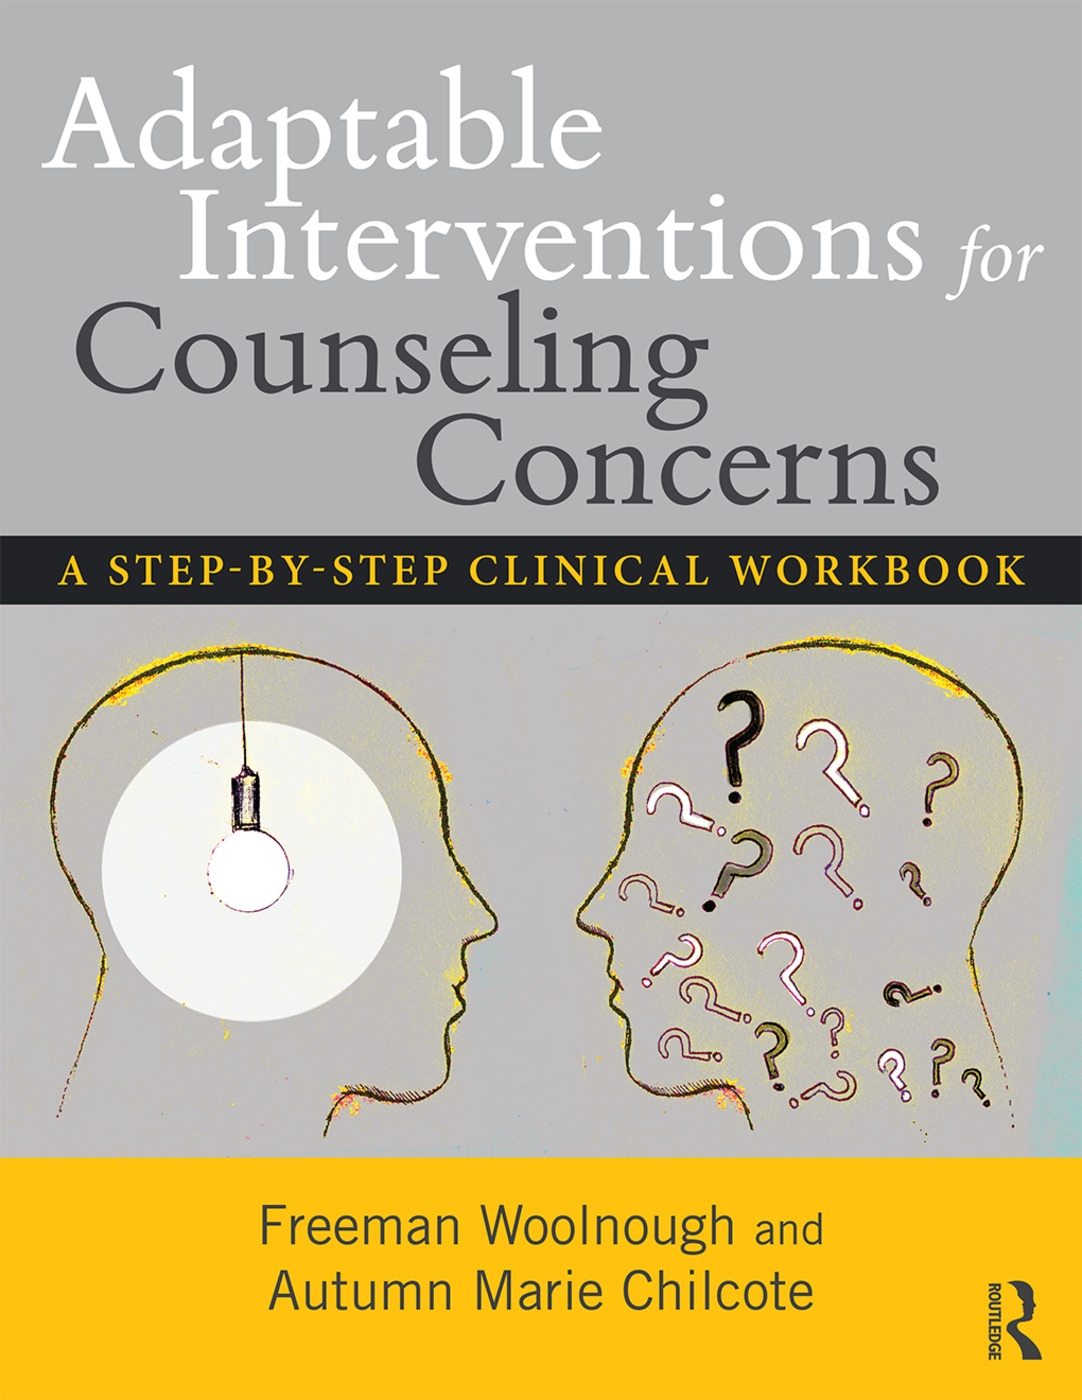 Adaptable Interventions for Counseling Concerns: A Step-By-Step Clinical Workbook